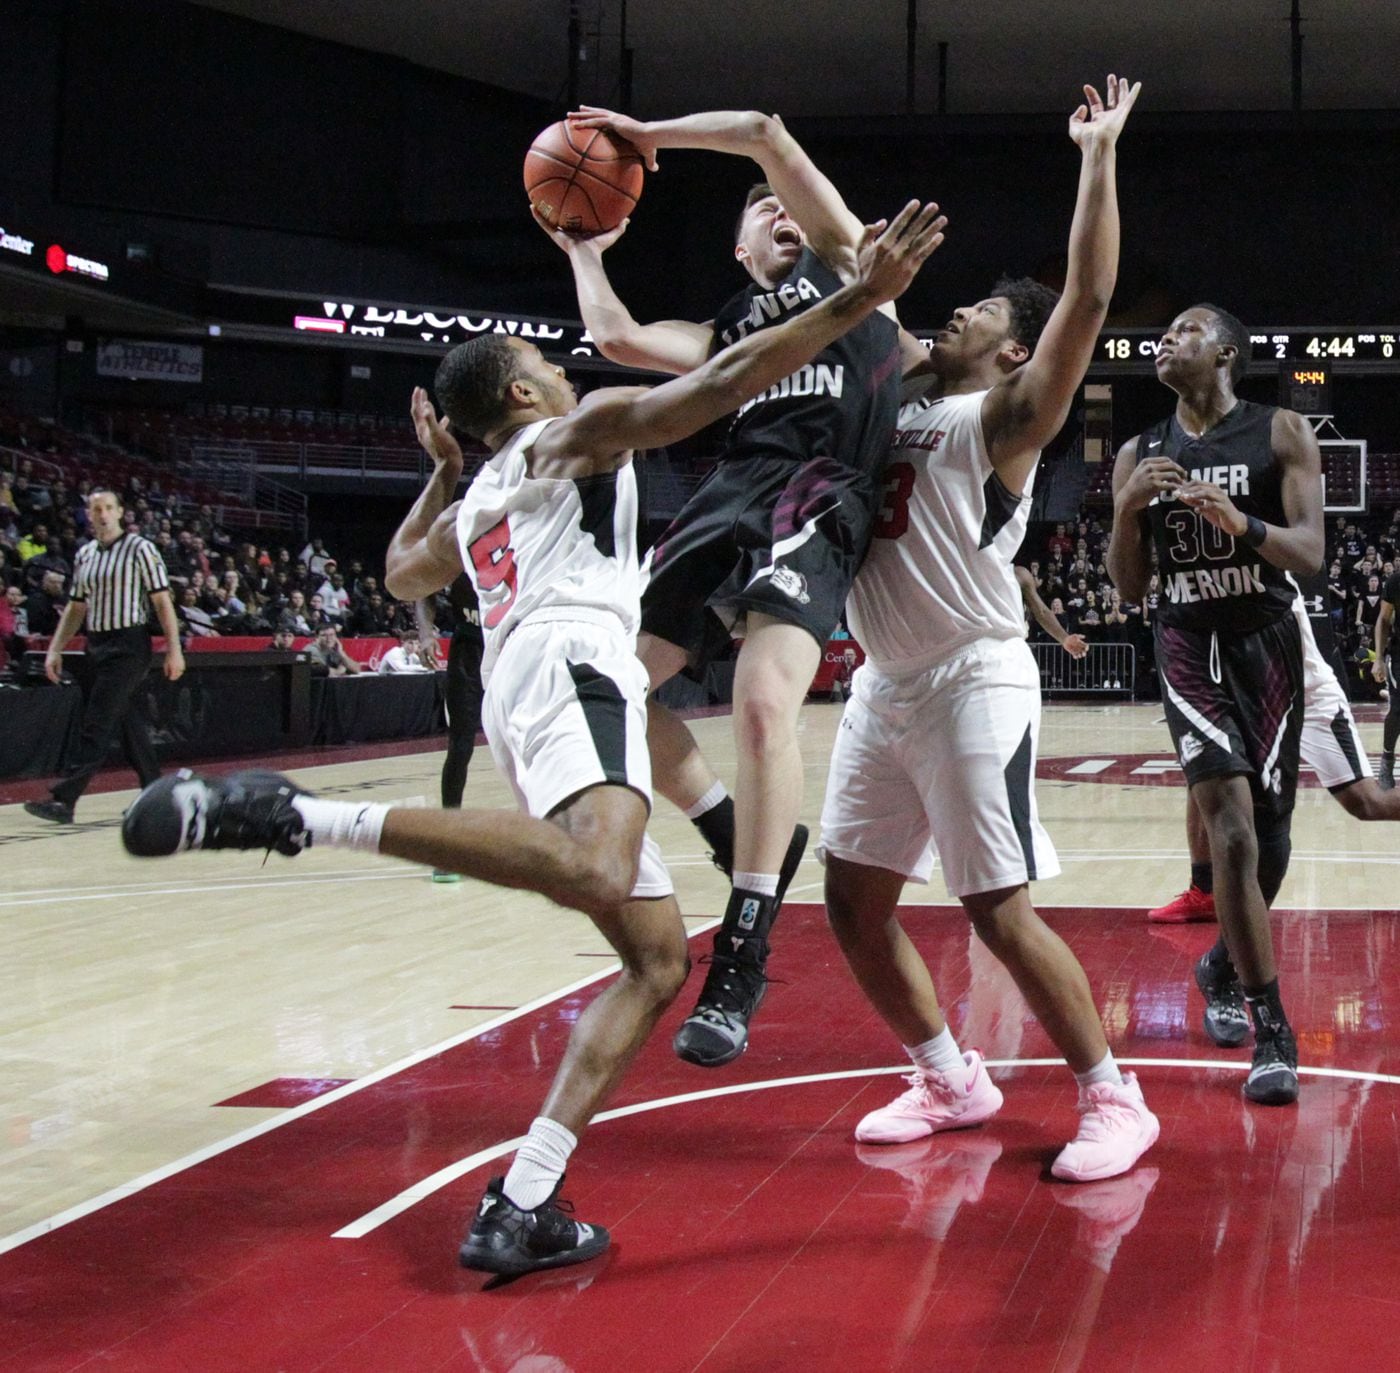 Theo Henry, center, of Lower Merion gets sandwiched between Dymere Miller, left, and Tione Holmes of Coatesville in the PIAA District 1 boys basketball semifinals at the Liacouras Center on Feb. 26, 2019.